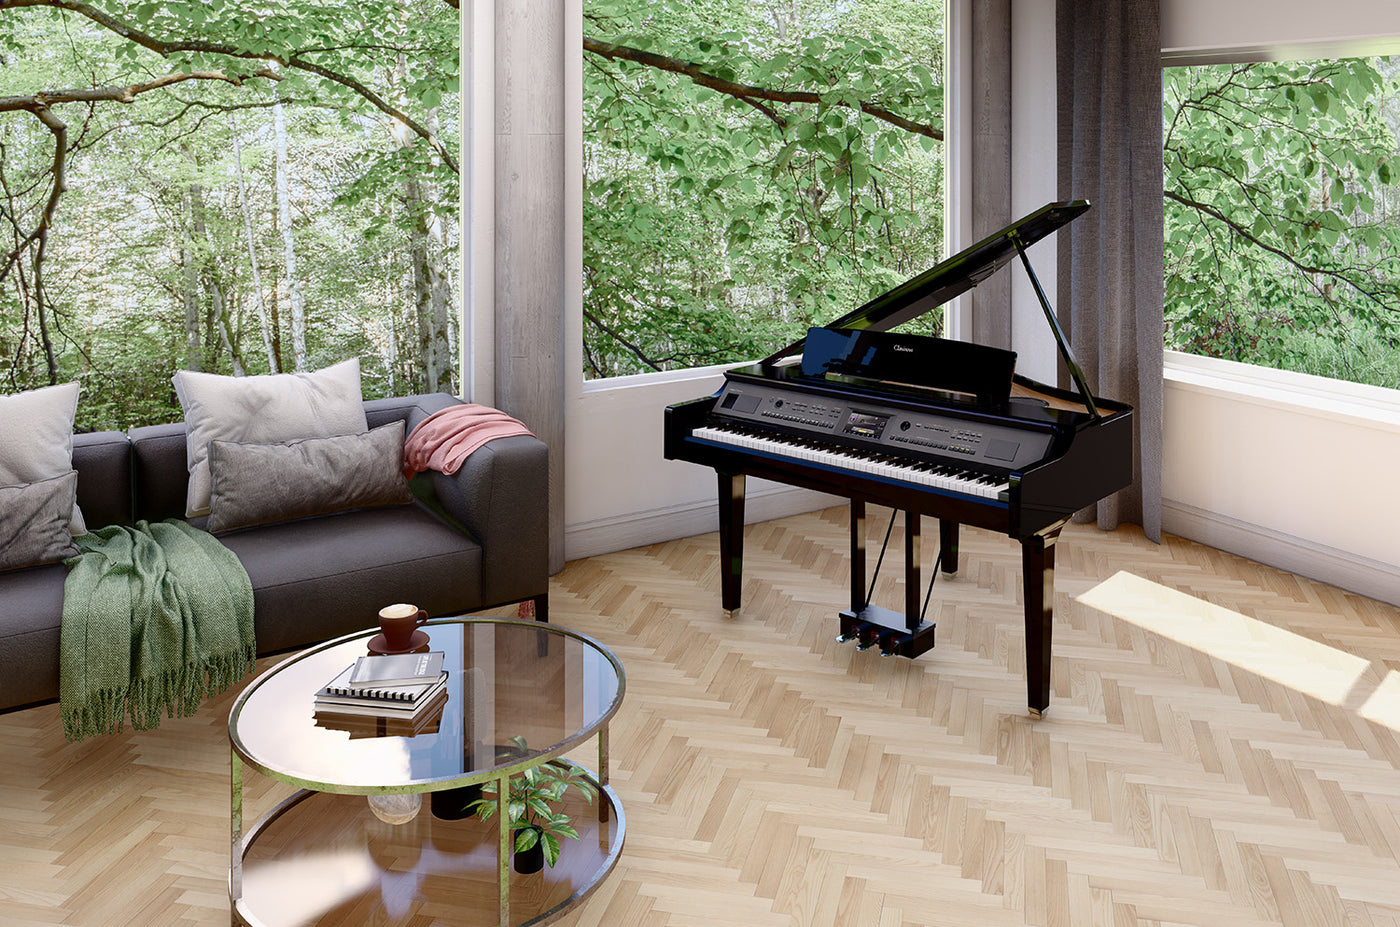 A modern living room with a black grand piano by the window, overlooking a lush green forest, with natural light highlighting the instrument's sheen.